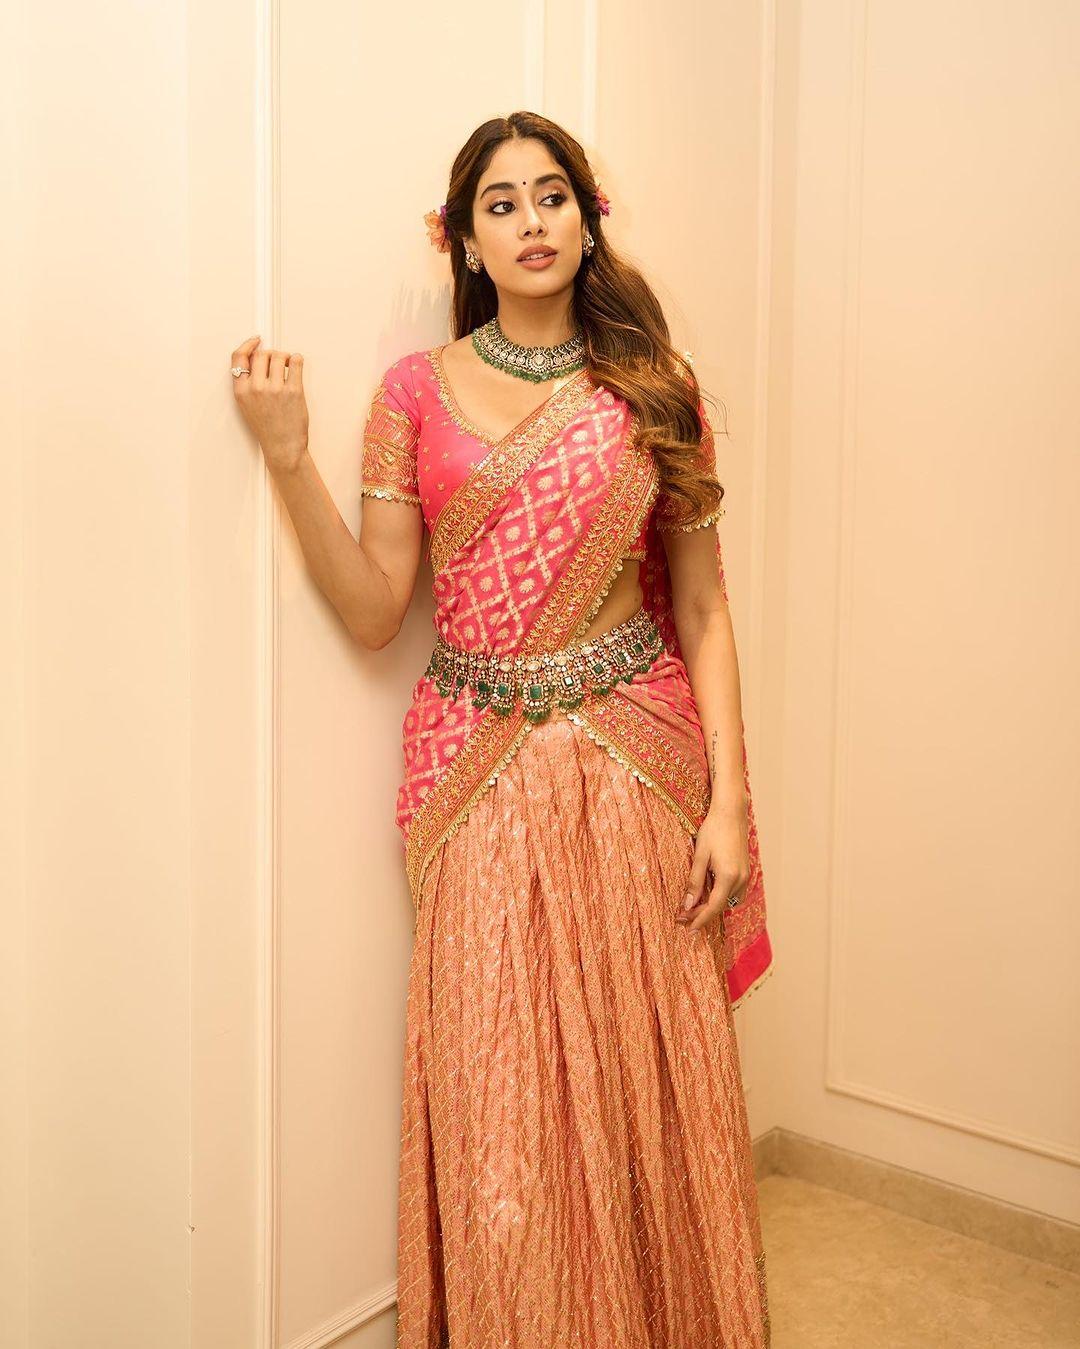 On the third day of the grand pre-wedding festivities for Anant Ambani and Radhika Merchant, Janhvi Kapoor looked stunning in a beautiful half-saree designed by Manish Malhotra. The theme for the day was 'Heritage India,' and Janhvi elegantly embraced traditional style. 